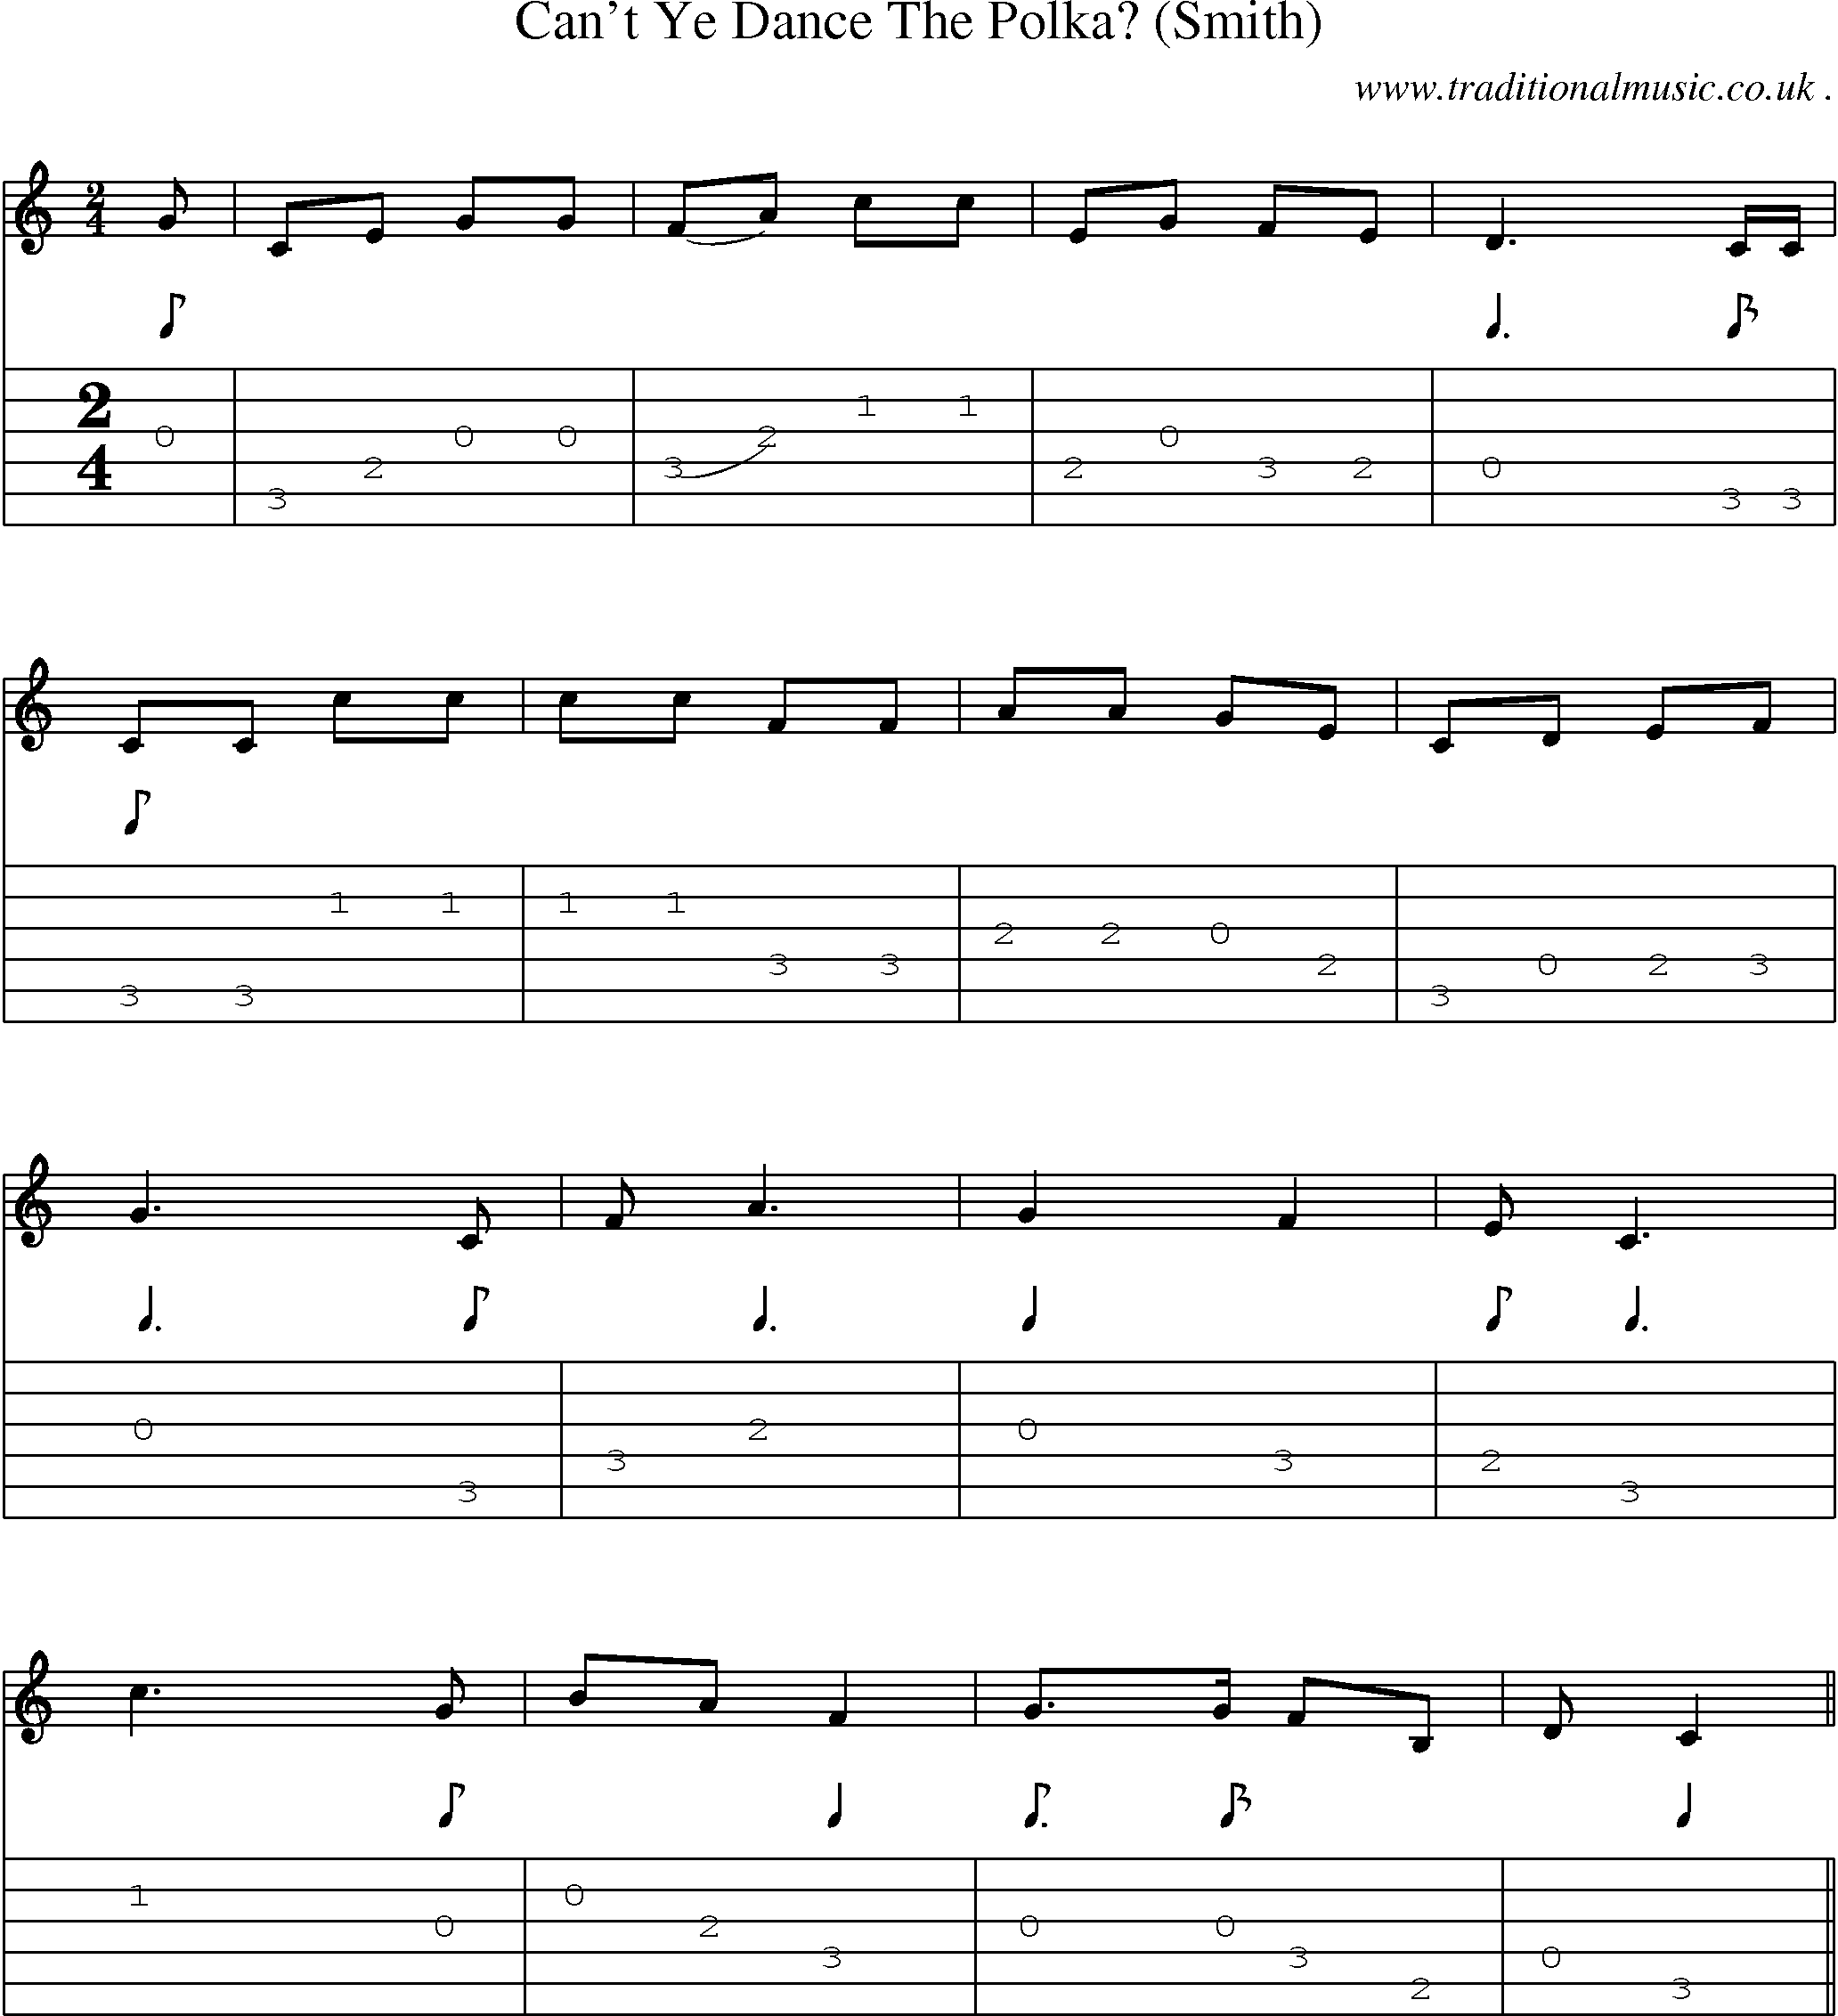 Sheet-Music and Guitar Tabs for Cant Ye Dance The Polka (smith)